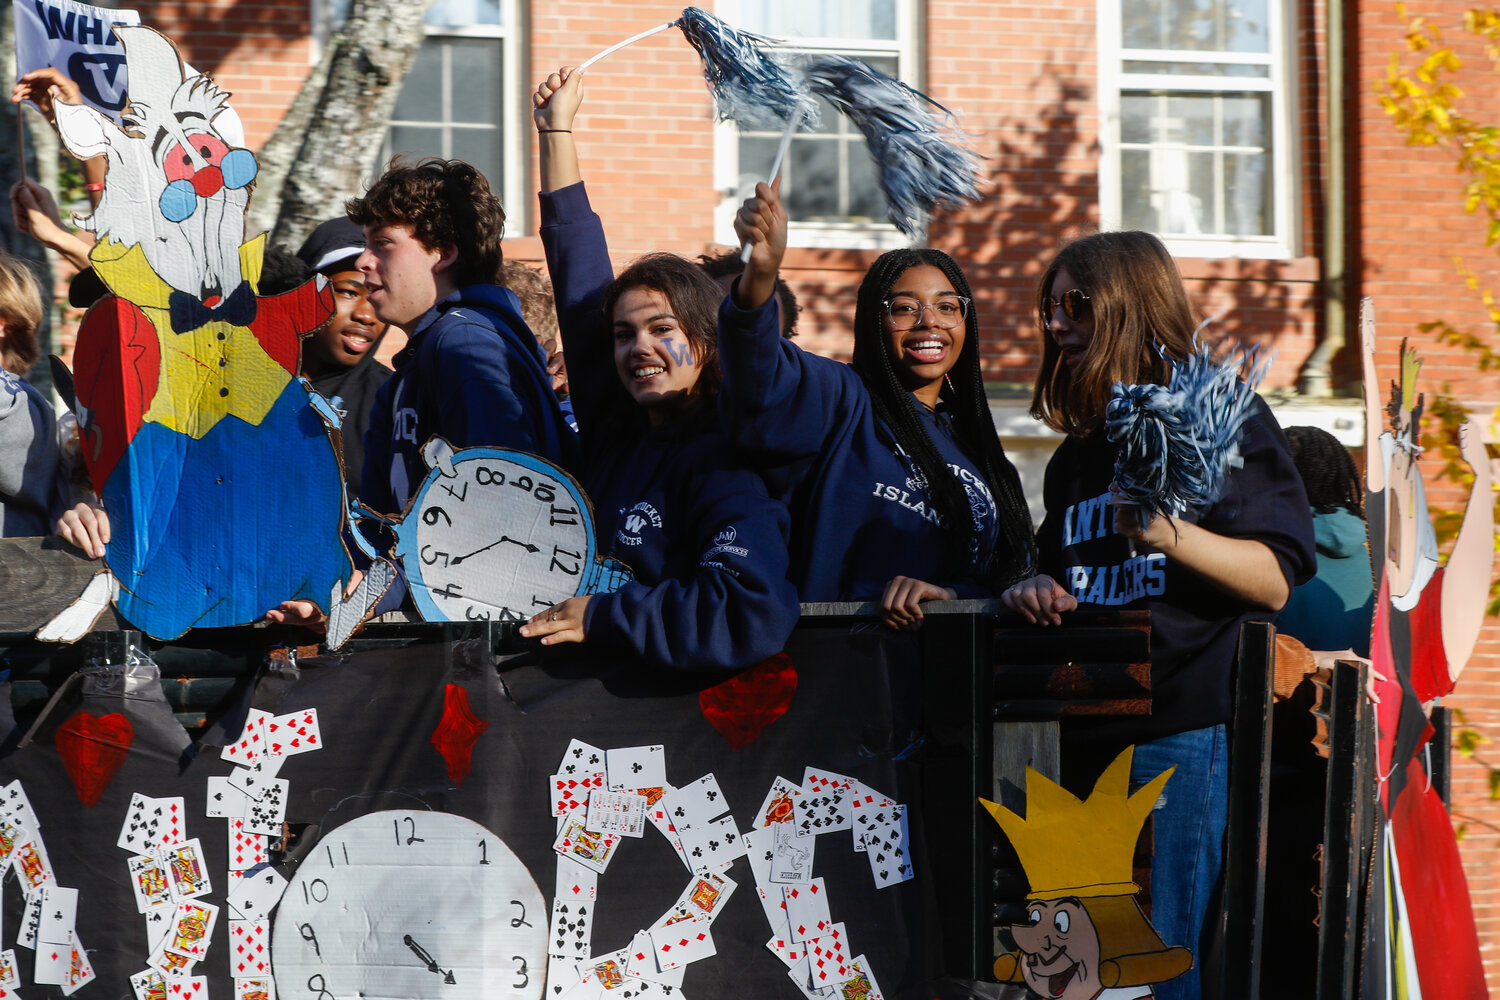 The annual Homecoming parade was held Saturday morning.